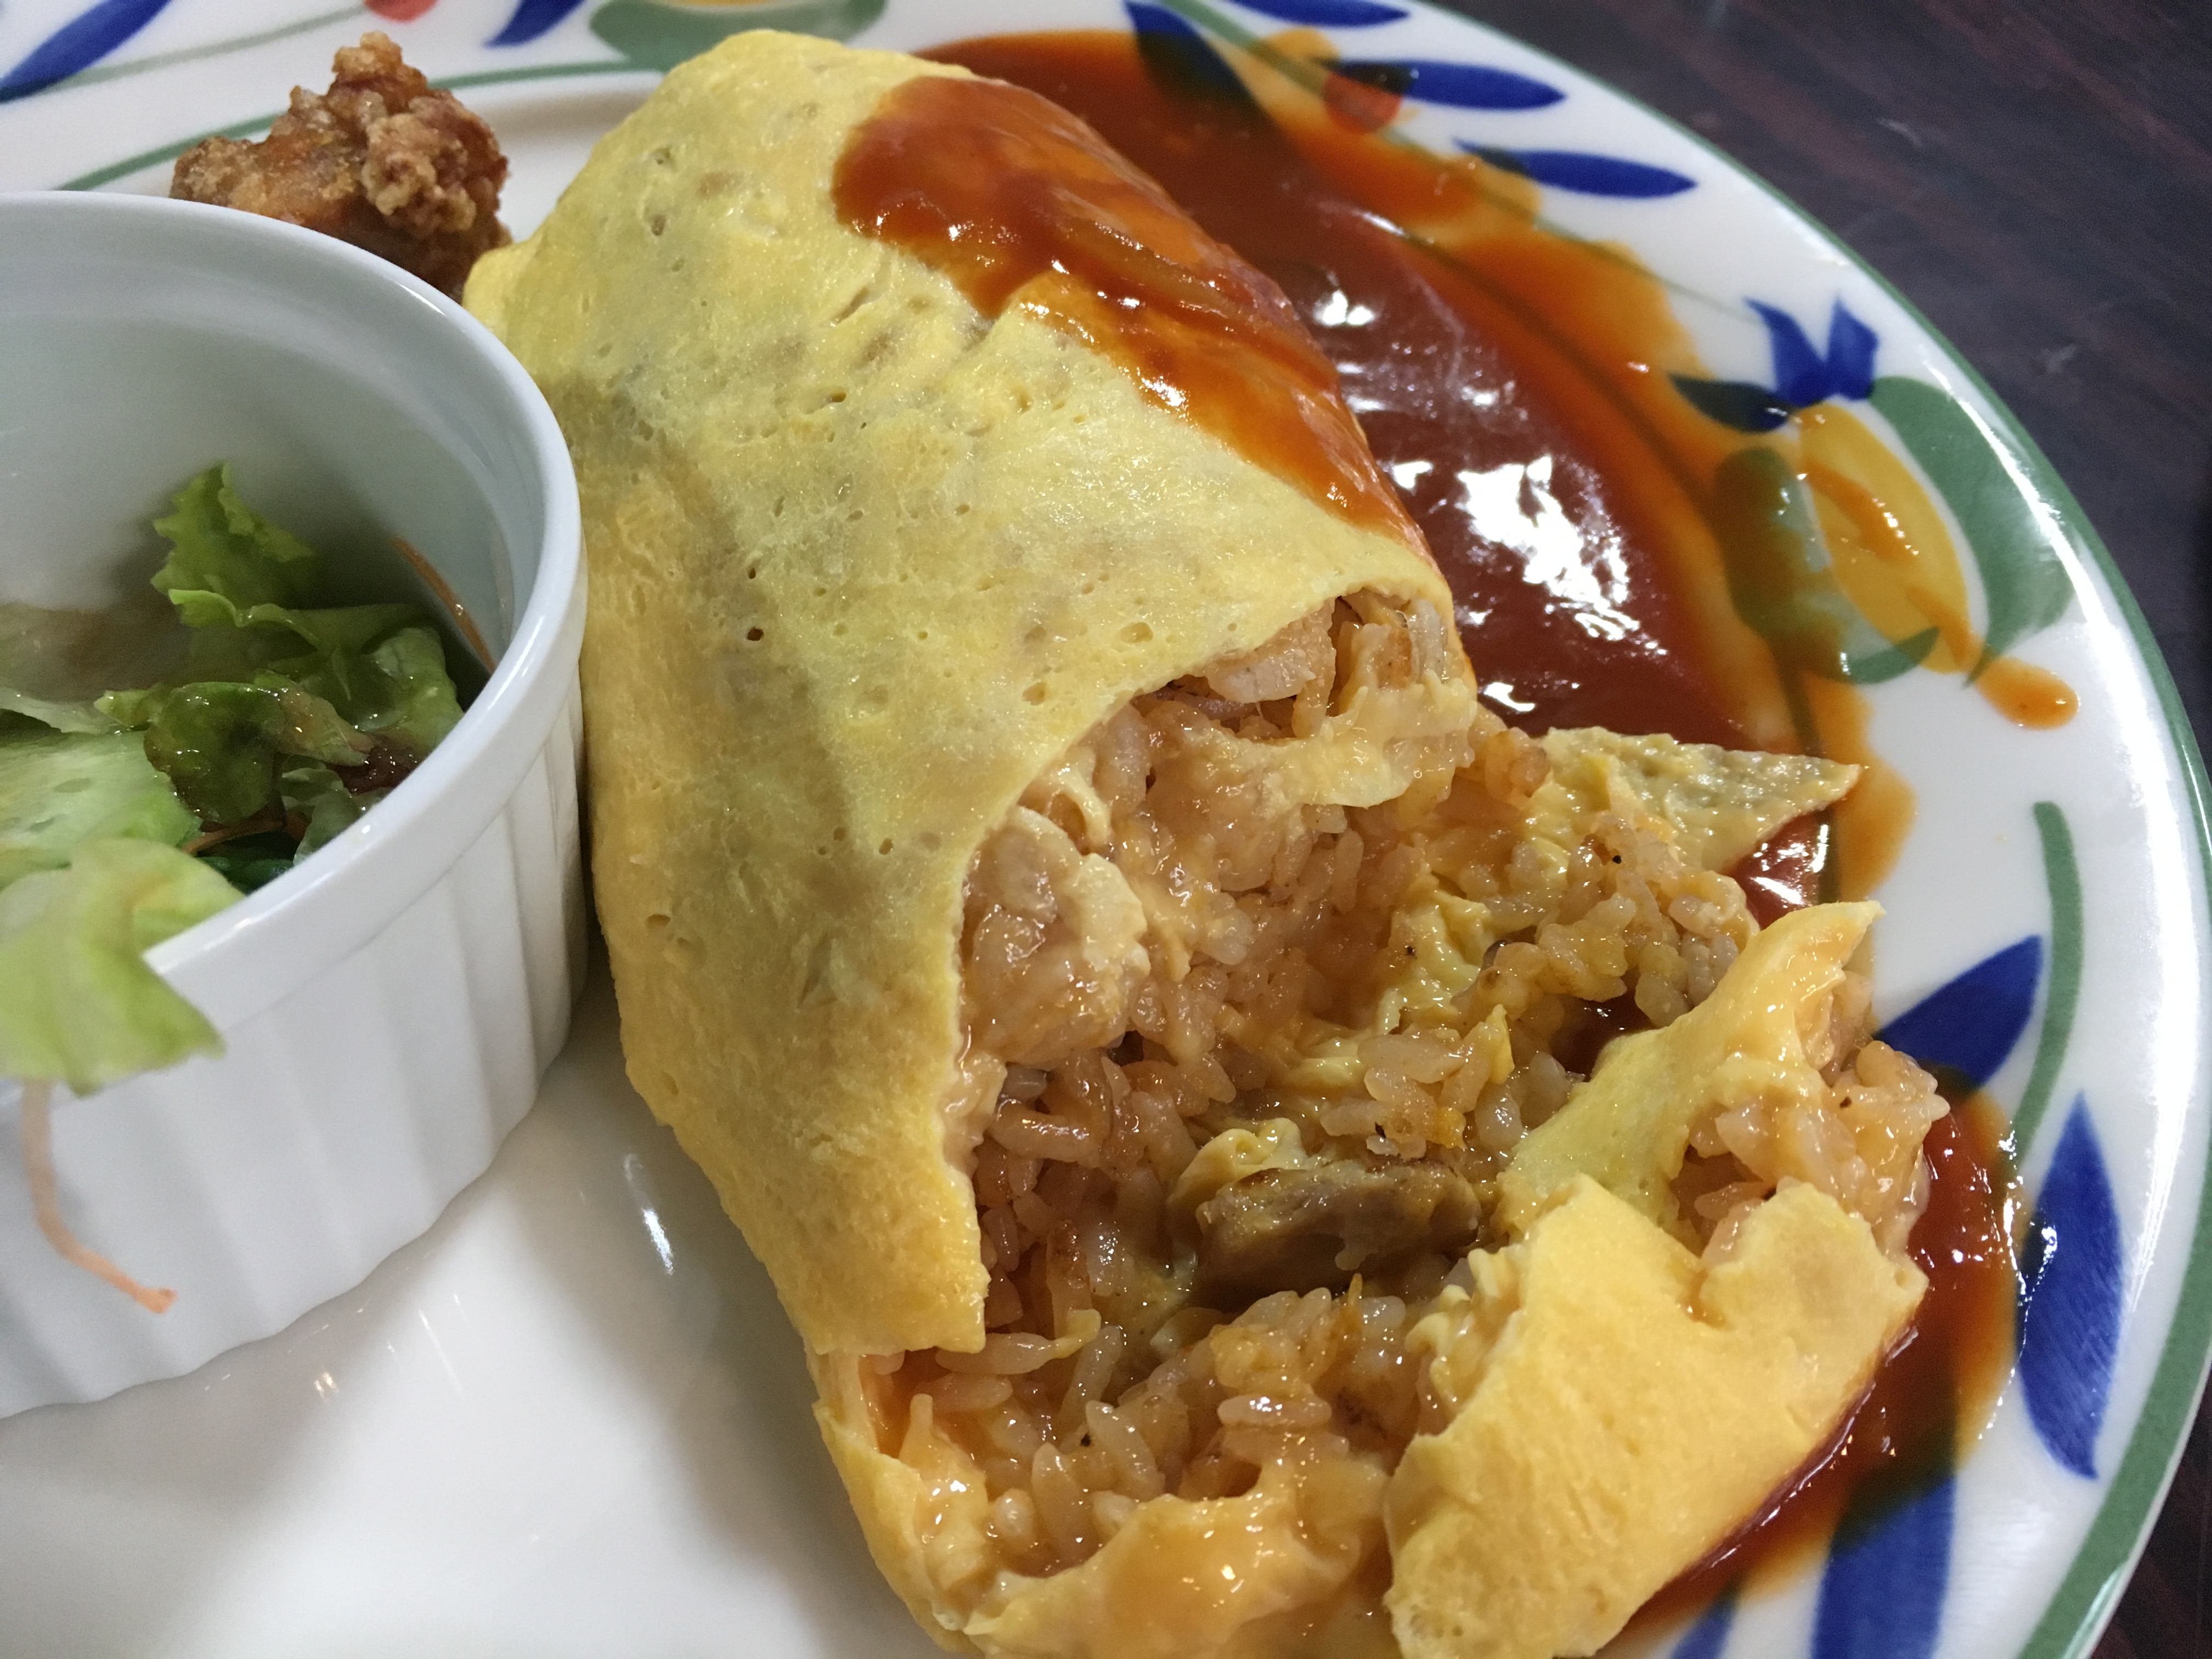 inside of omurice with a side of sauce